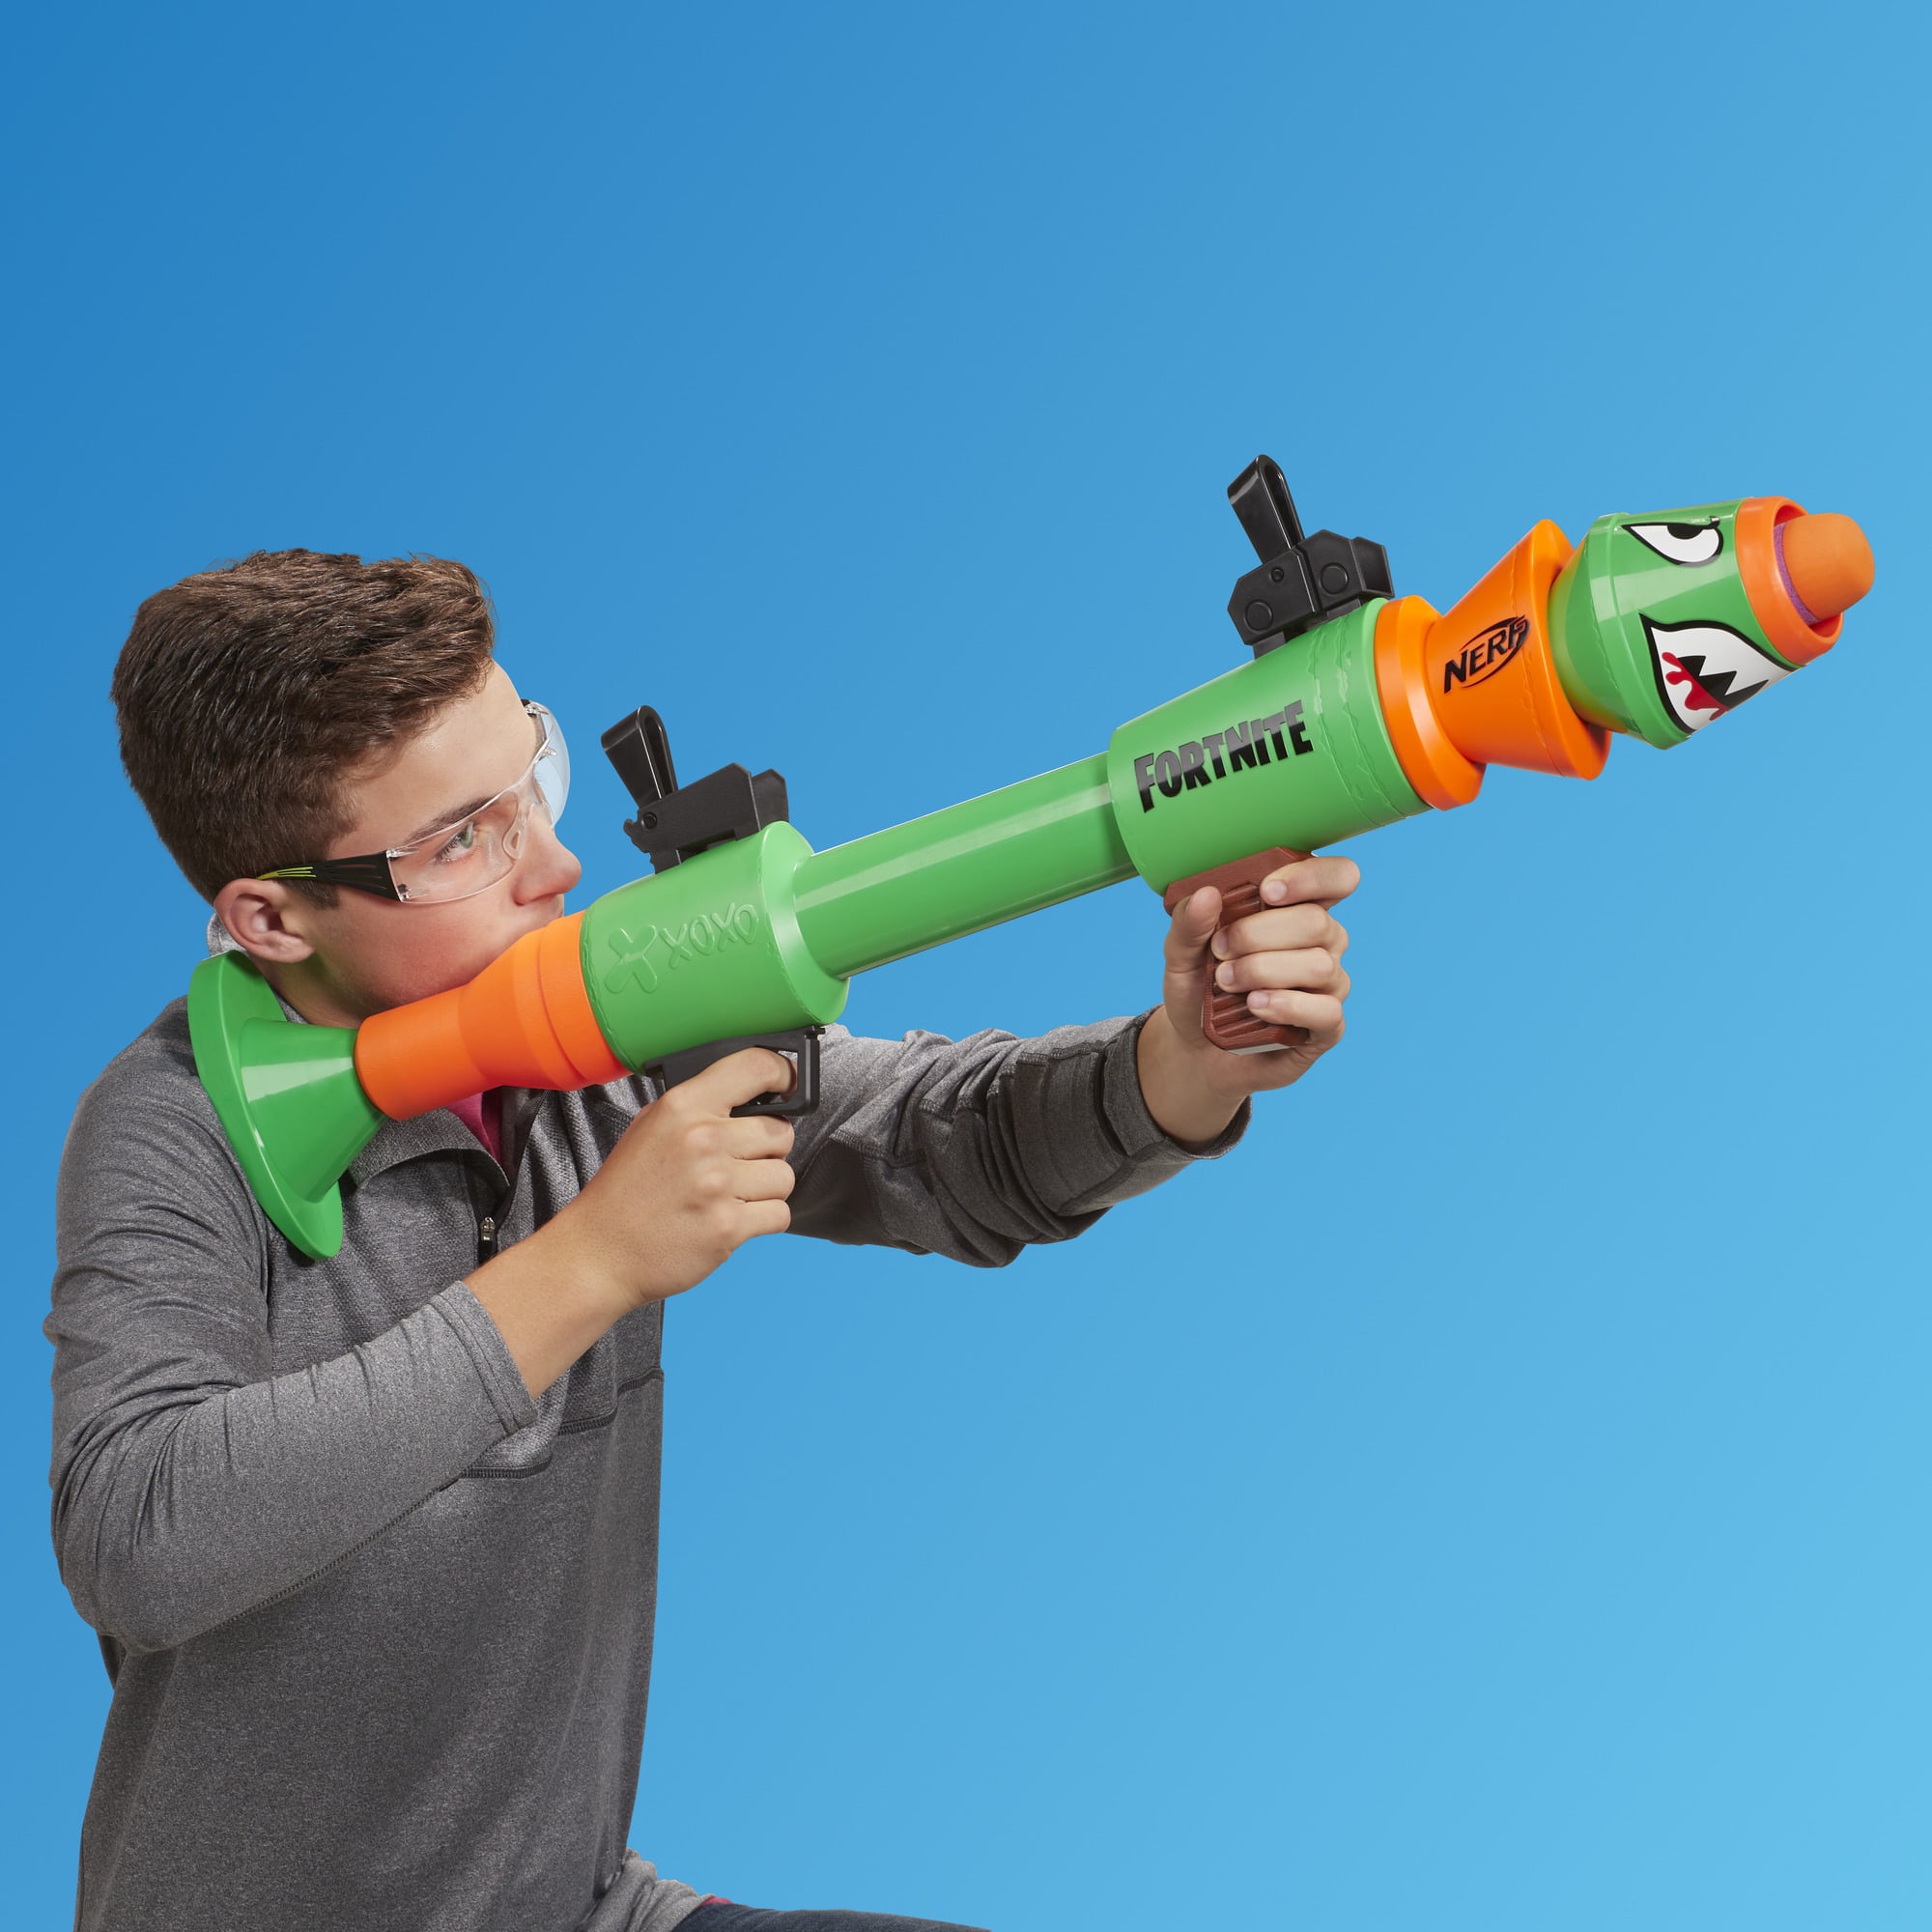 nerf rpg for sale